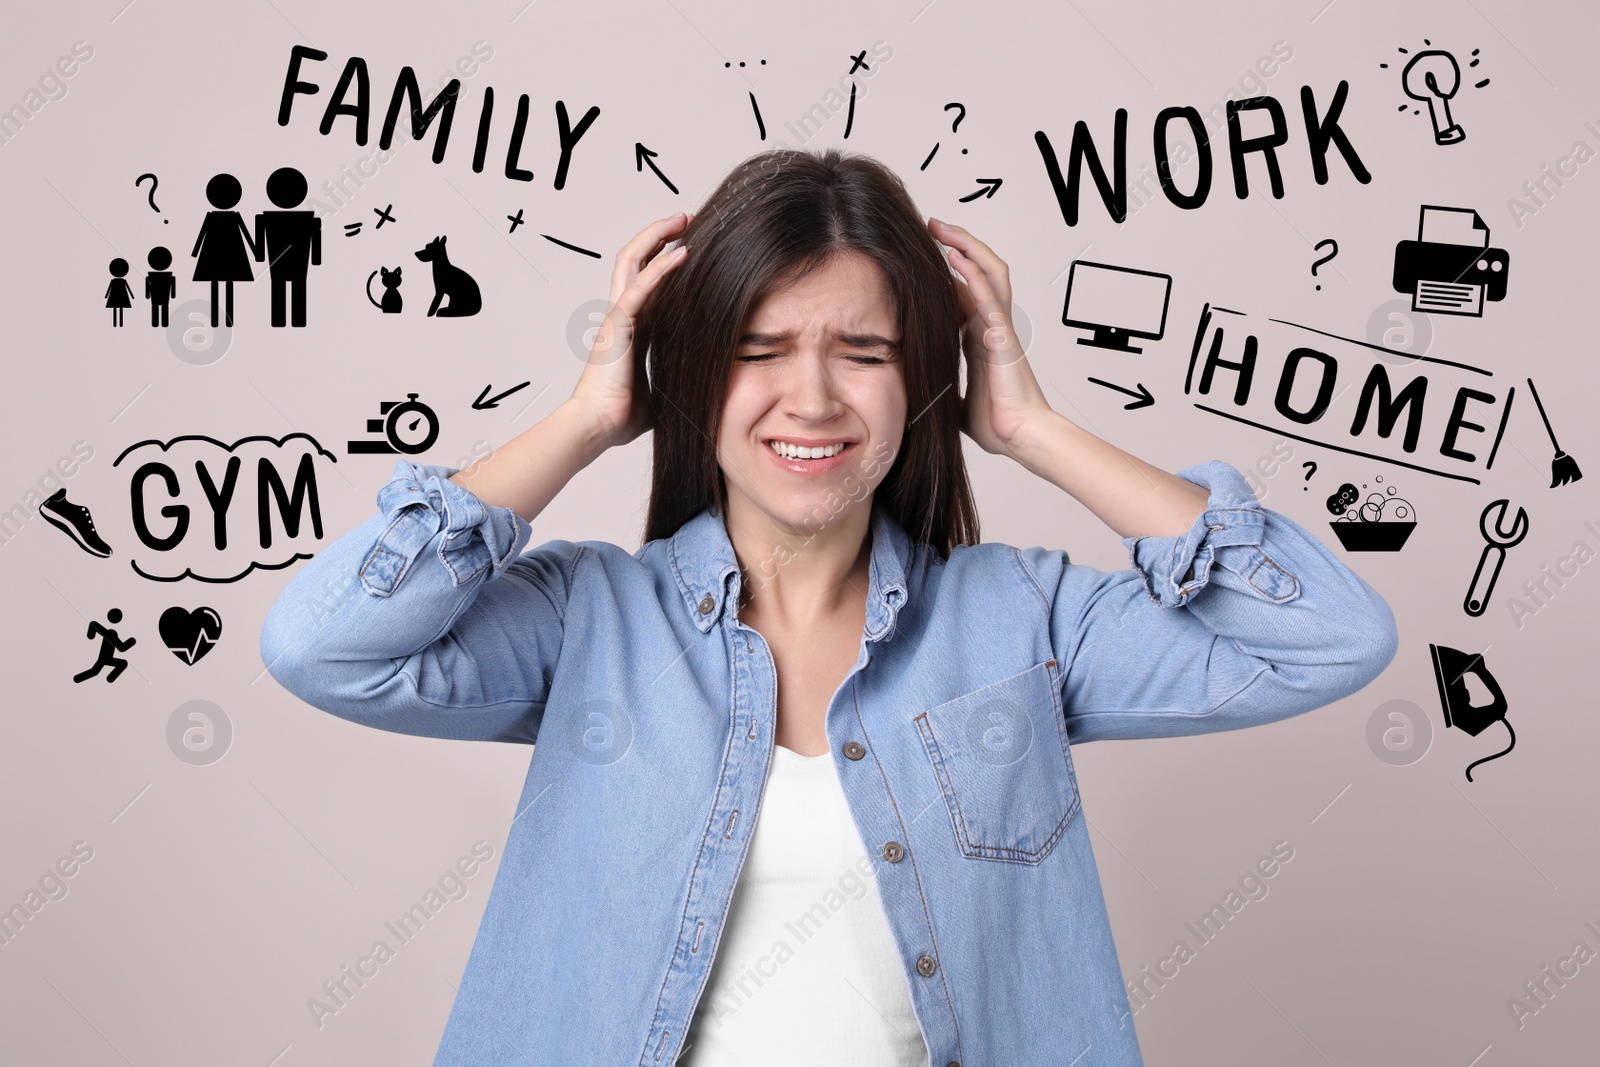 Image of Stressed young woman, text and drawings on grey background